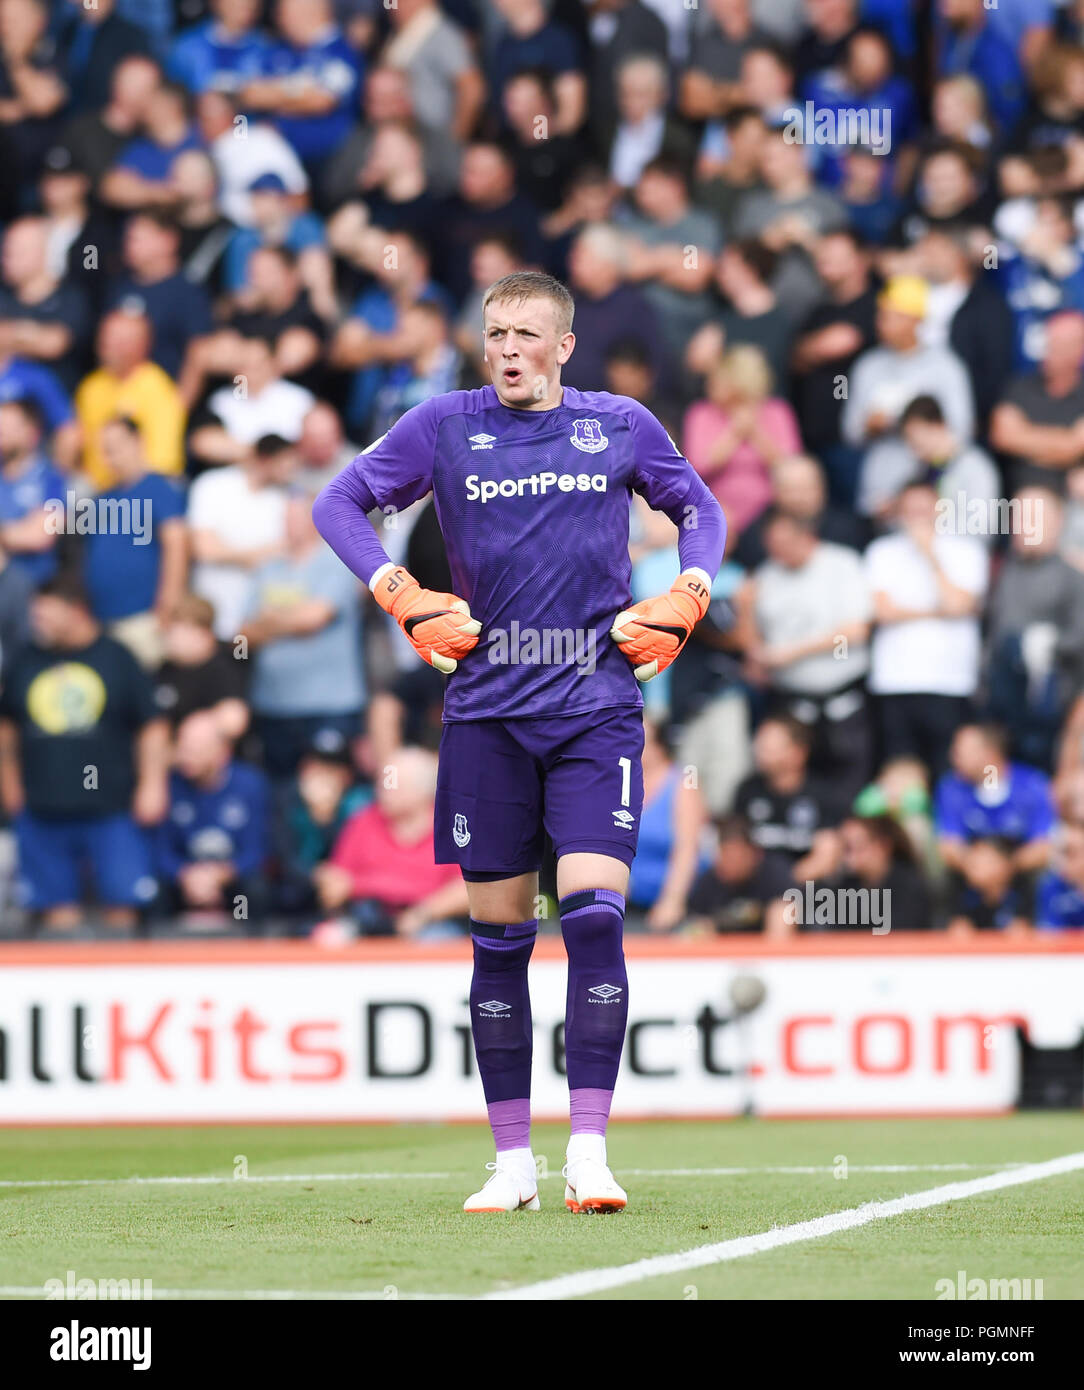 Jordan Pickford of Everton during the Premier League match between AFC Bournemouth and Everton at the Vitality Stadium , Bournemouth , 25 Aug 2018 Editorial use only. No merchandising. For Football images FA and Premier League restrictions apply inc. no internet/mobile usage without FAPL license - for details contact Football Dataco Stock Photo